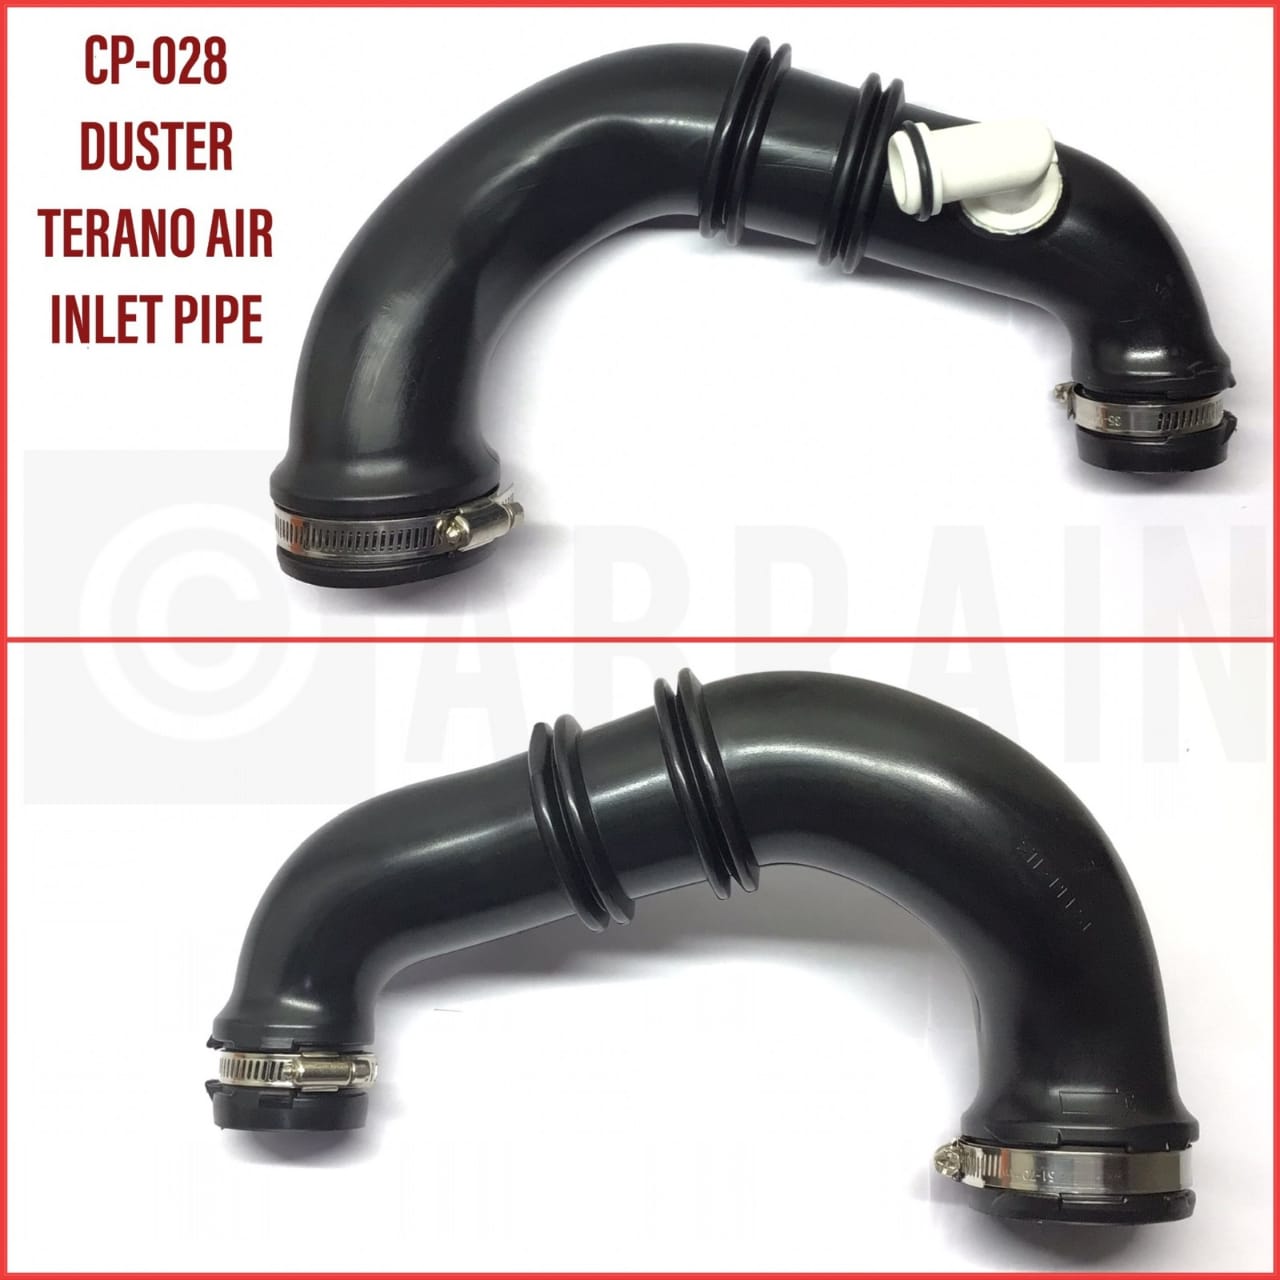 DUSTER TERANO AIR INLET PIPE